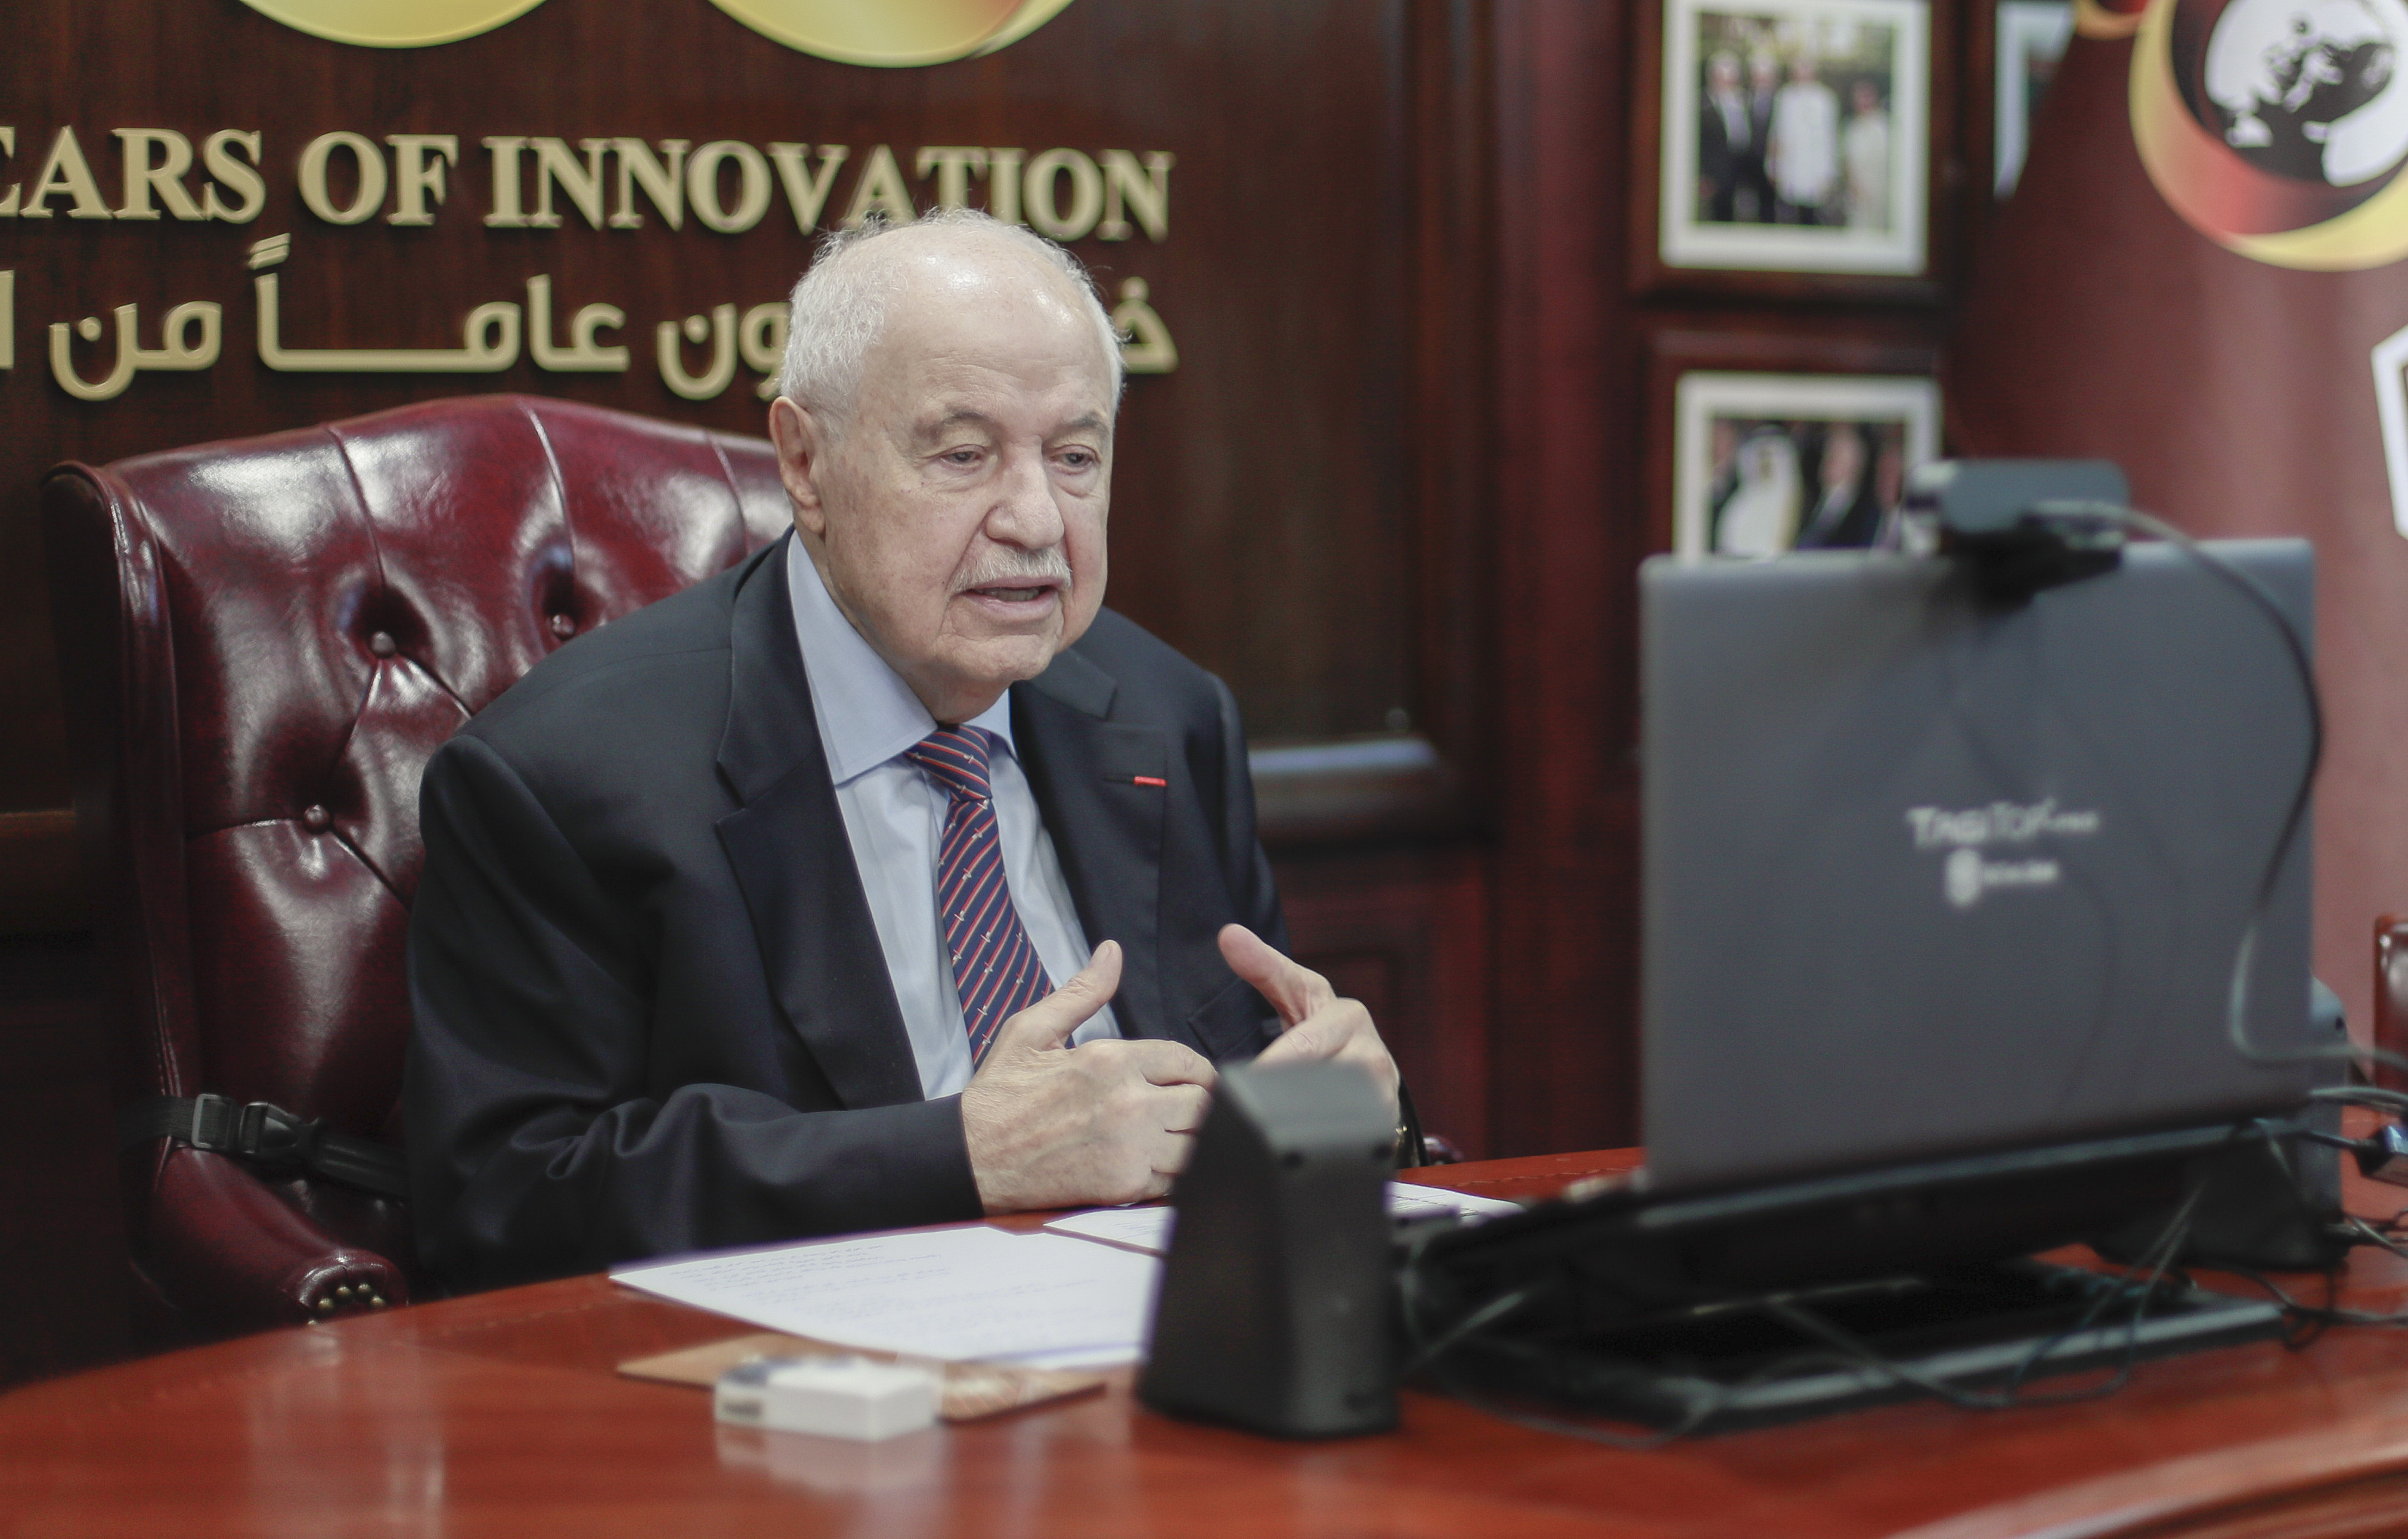 Dr. Abu-Ghazaleh Takes Part in the 1st SCCEE International Virtual Conference